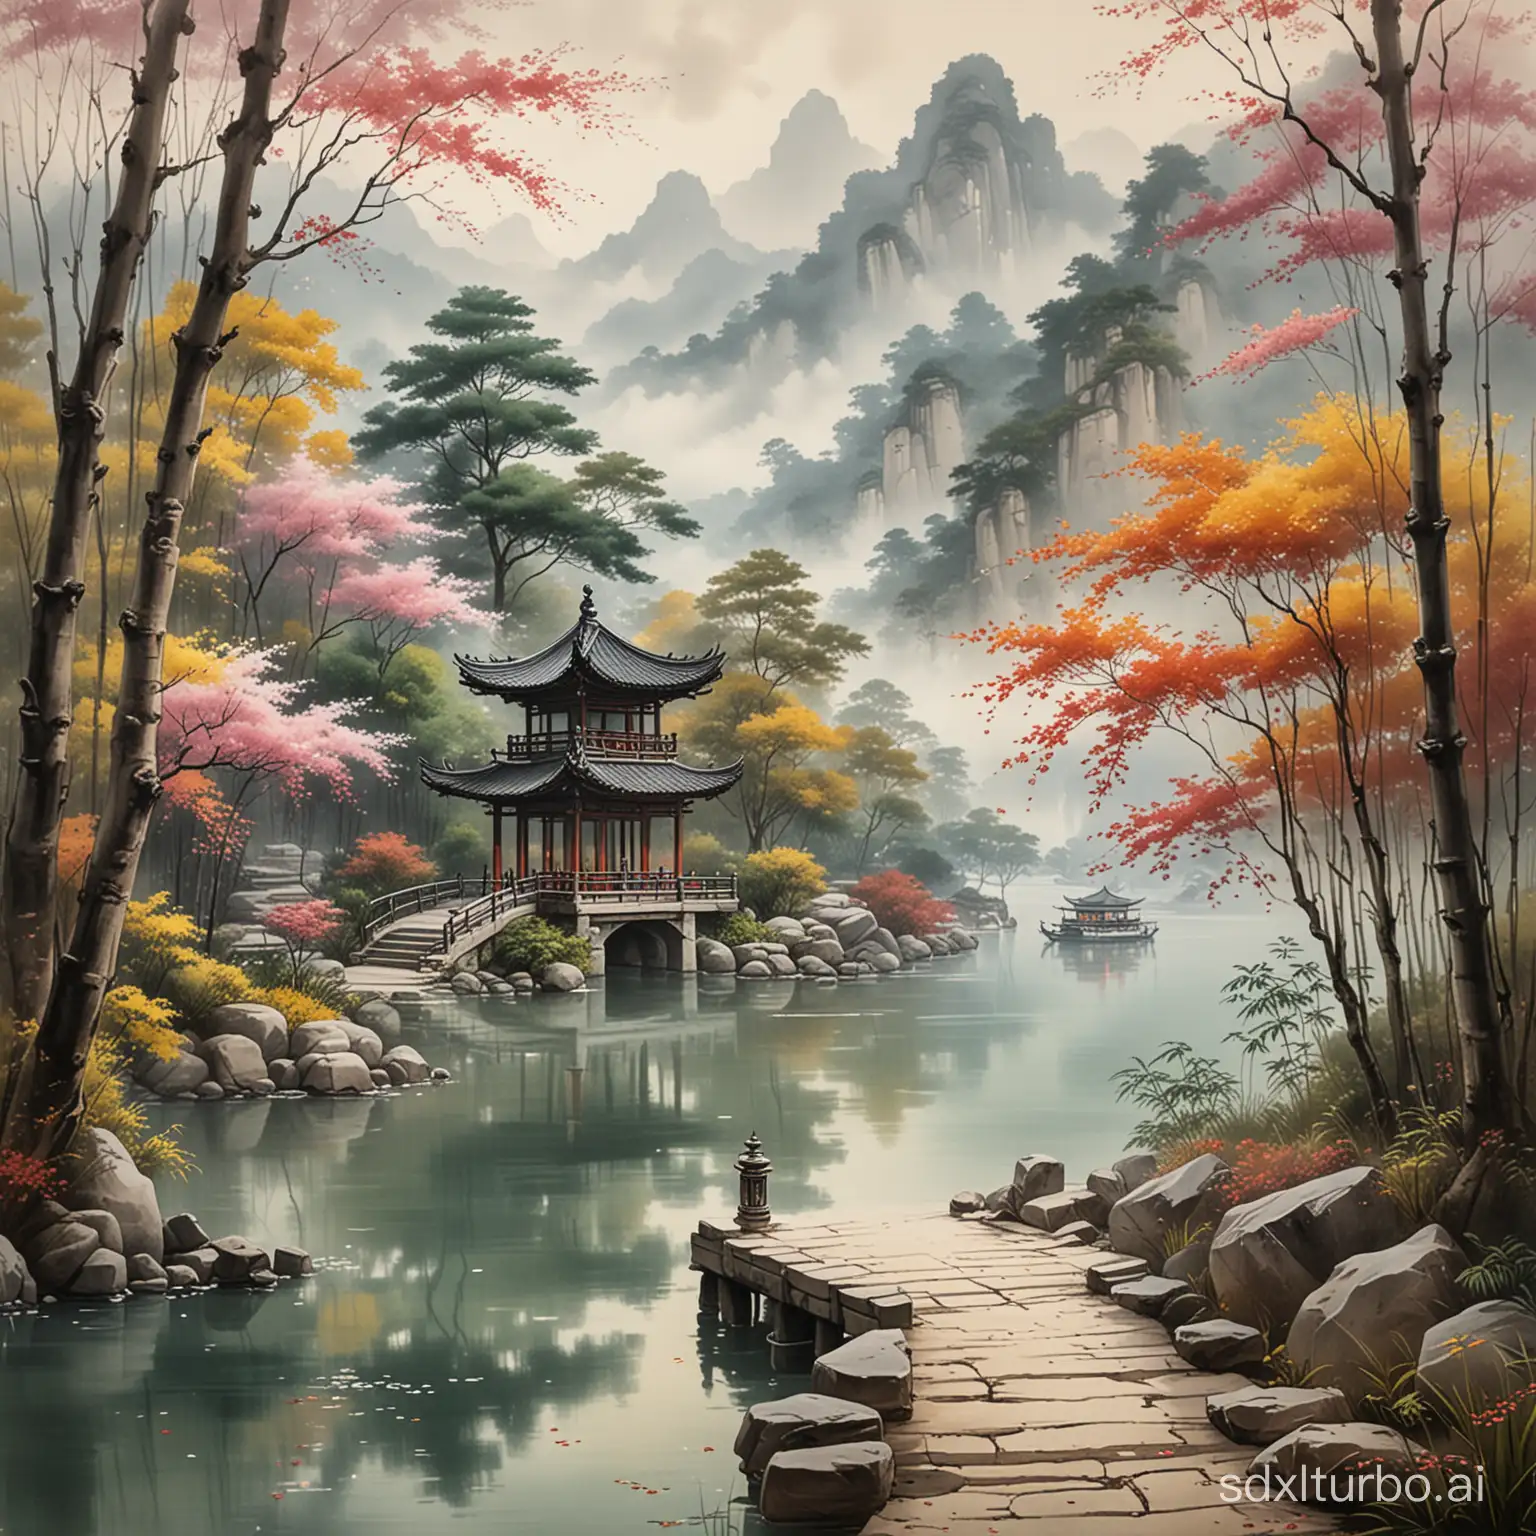 A Chinese ink painting depicts a Chinese style pavilion located on a calm lake， surrounded by dense forests and bamboo forests. The stone step path meanders towards the lake， with lanterns hanging on both sides emitting soft light， and the falling petals are colorful. The mountain peaks shrouded in clouds and mist in the distance are faintly visible.